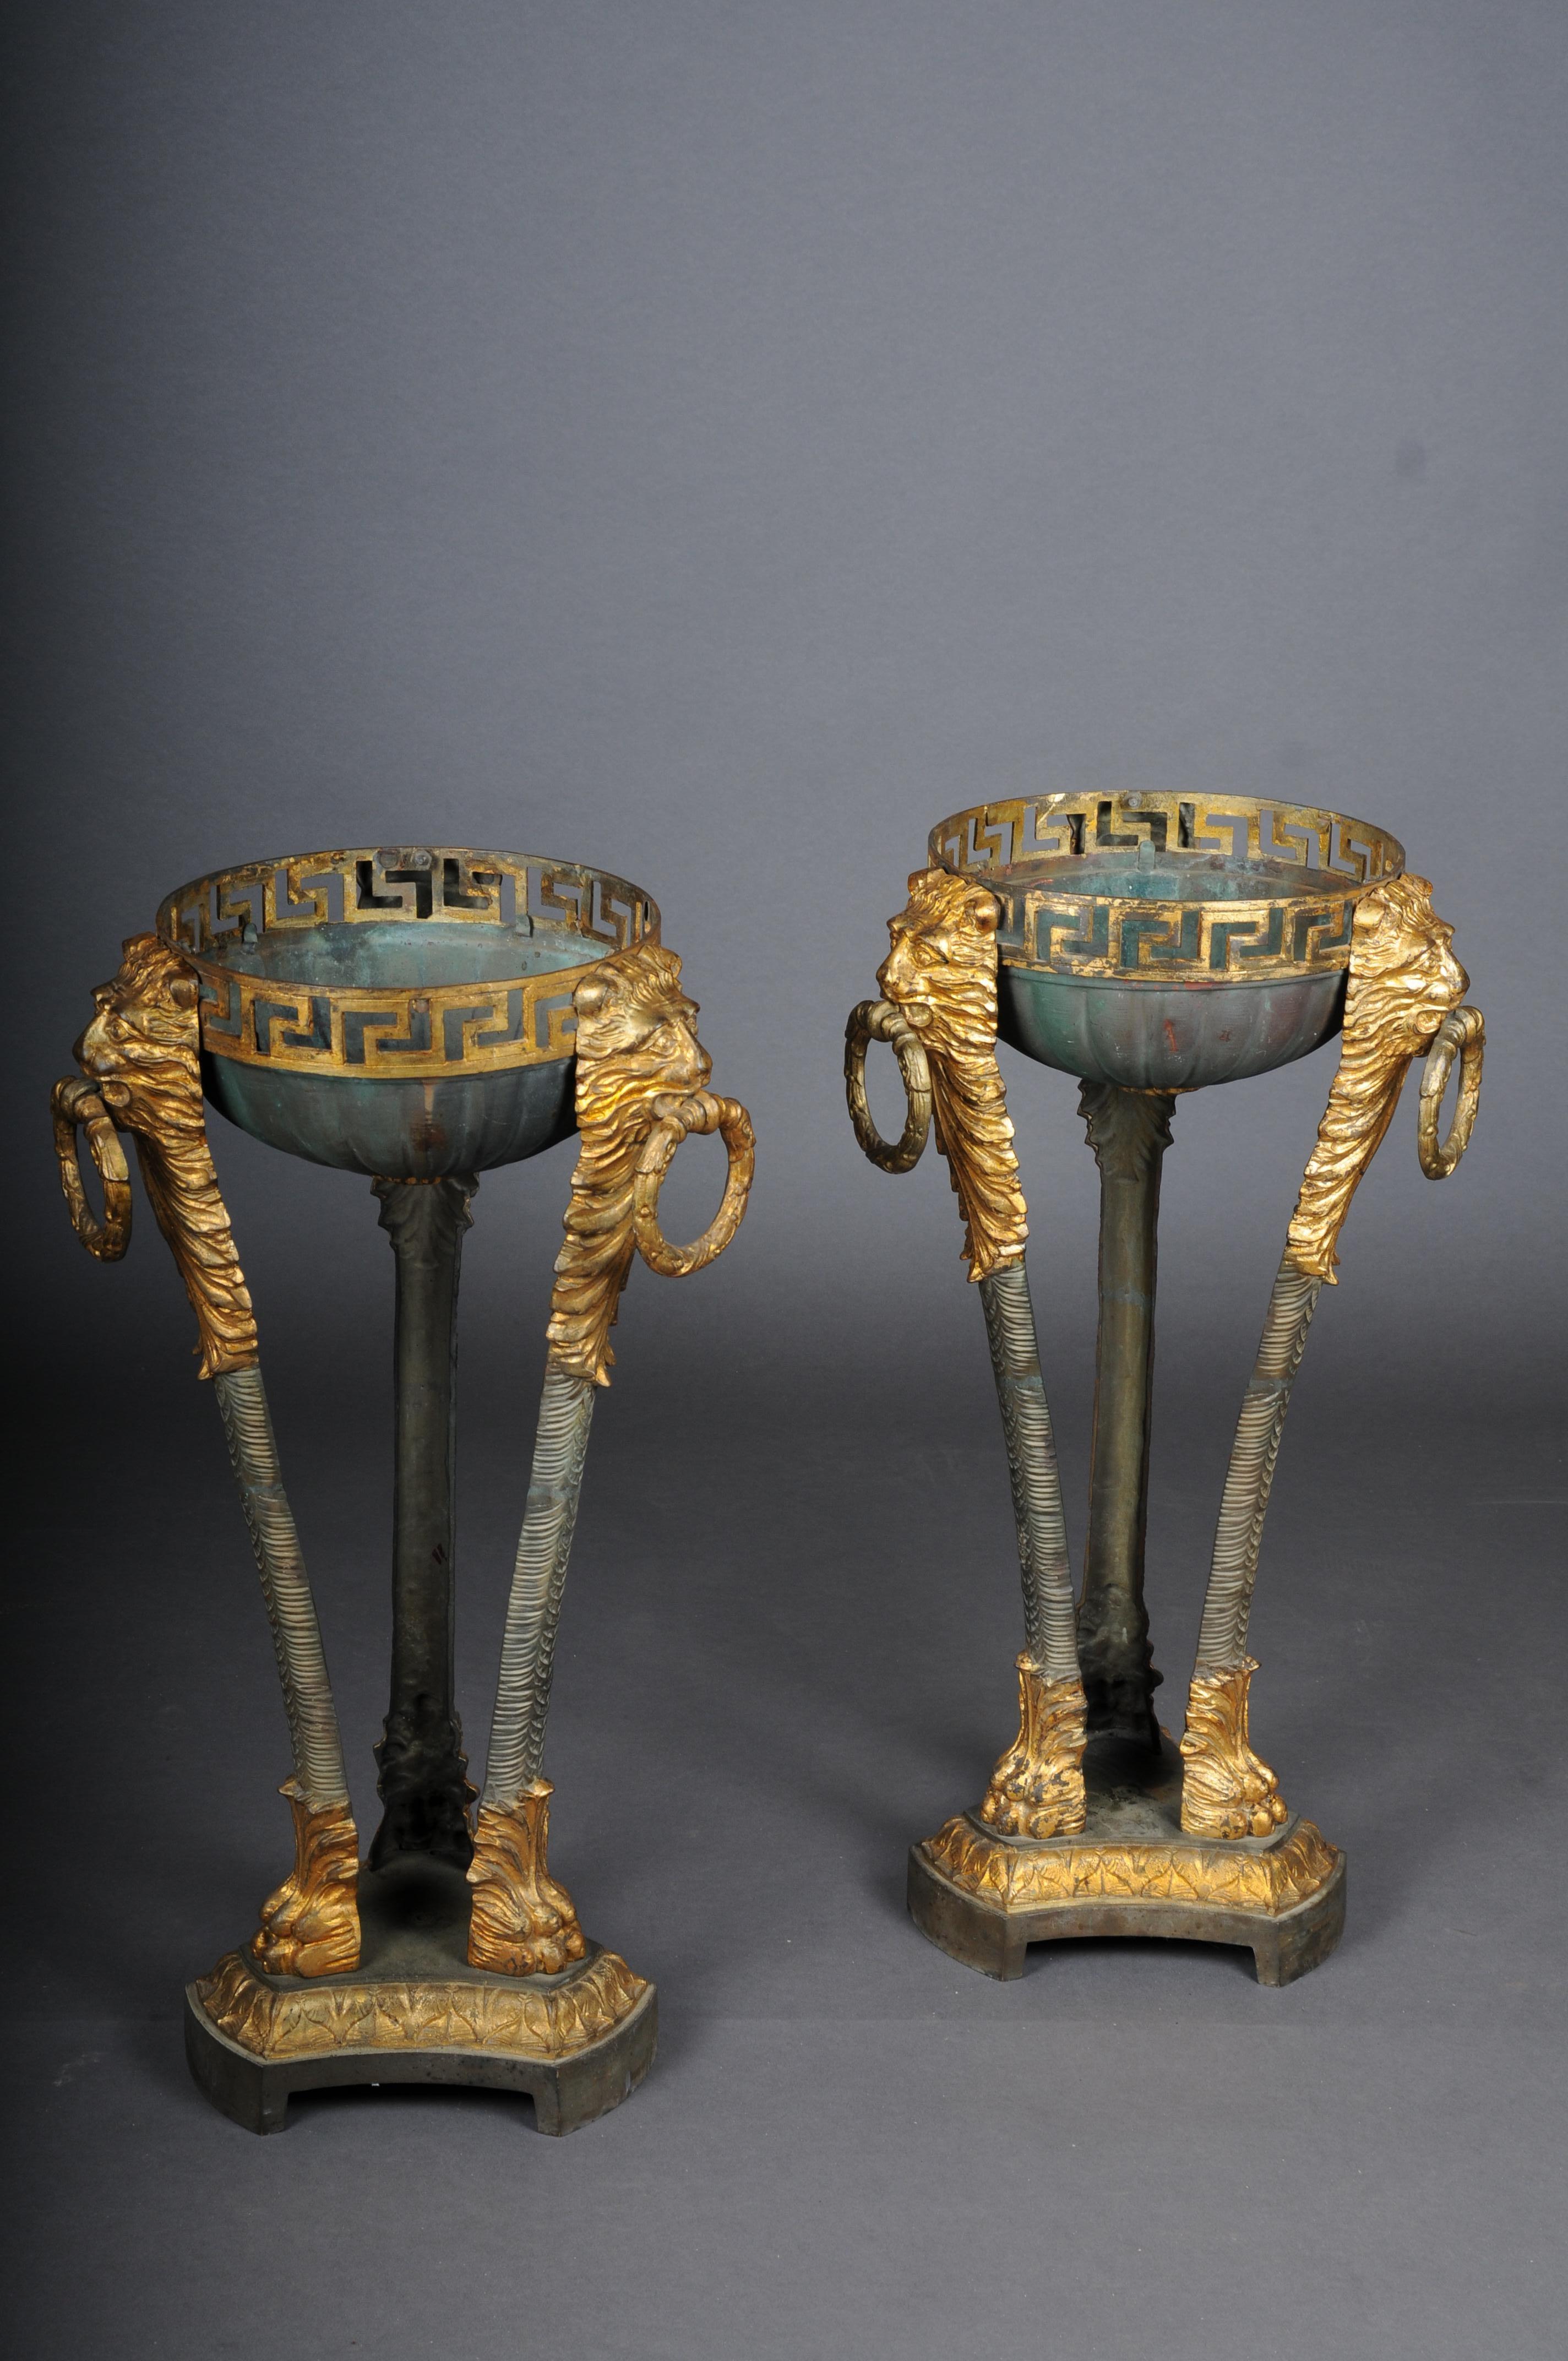 Pair (2) gueridons/flower columns in Athens, France, 19th century

Metal, partly gilded. Tripod frame flanked by three-dimensional lion heads with gripping handles, base with clawed feet. Antique Greek decor with a meander edge.

The gueridons can